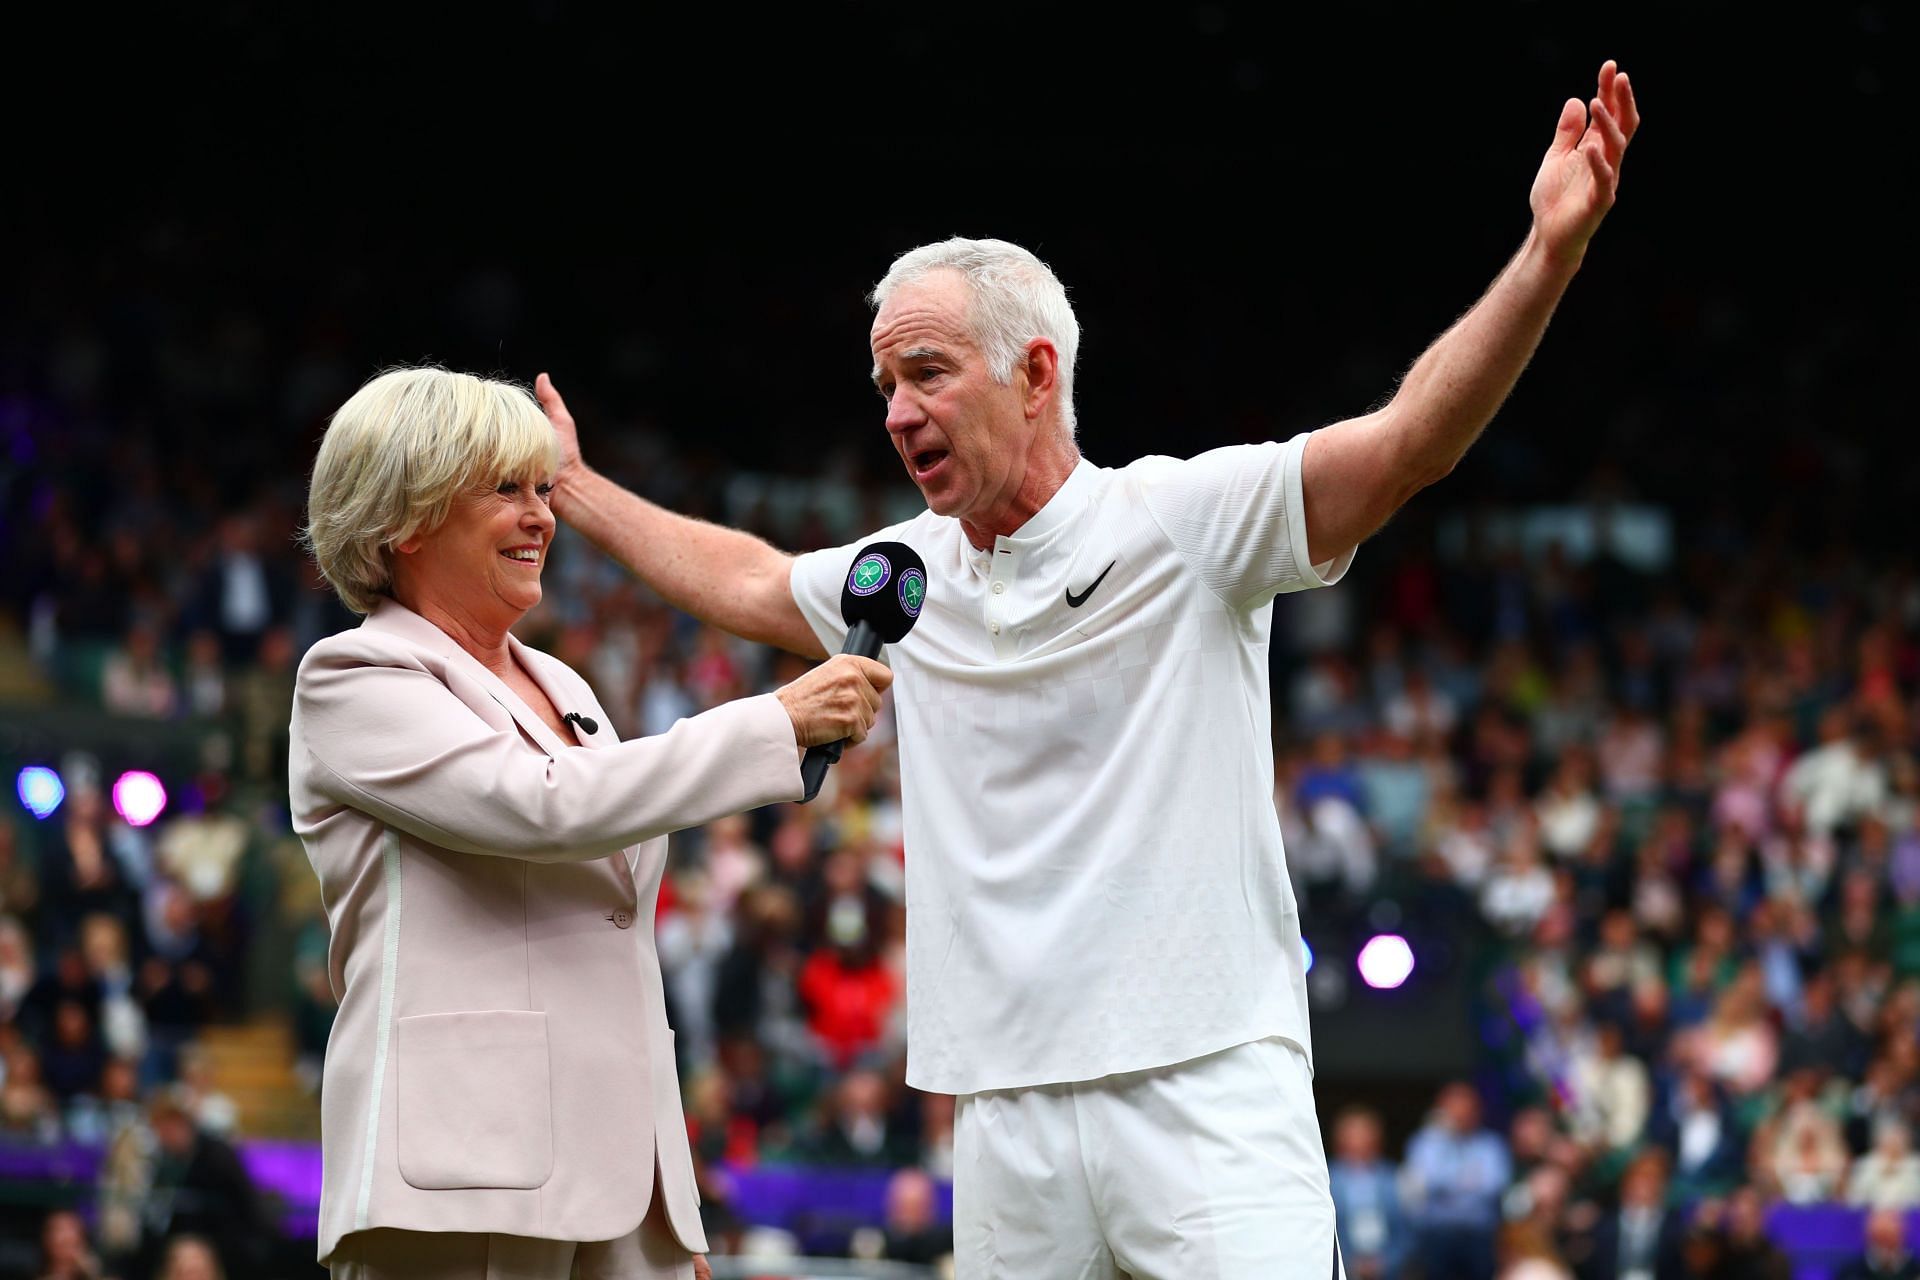 Wimbledon Court No. 1 Celebration in support of the Wimbledon Foundation